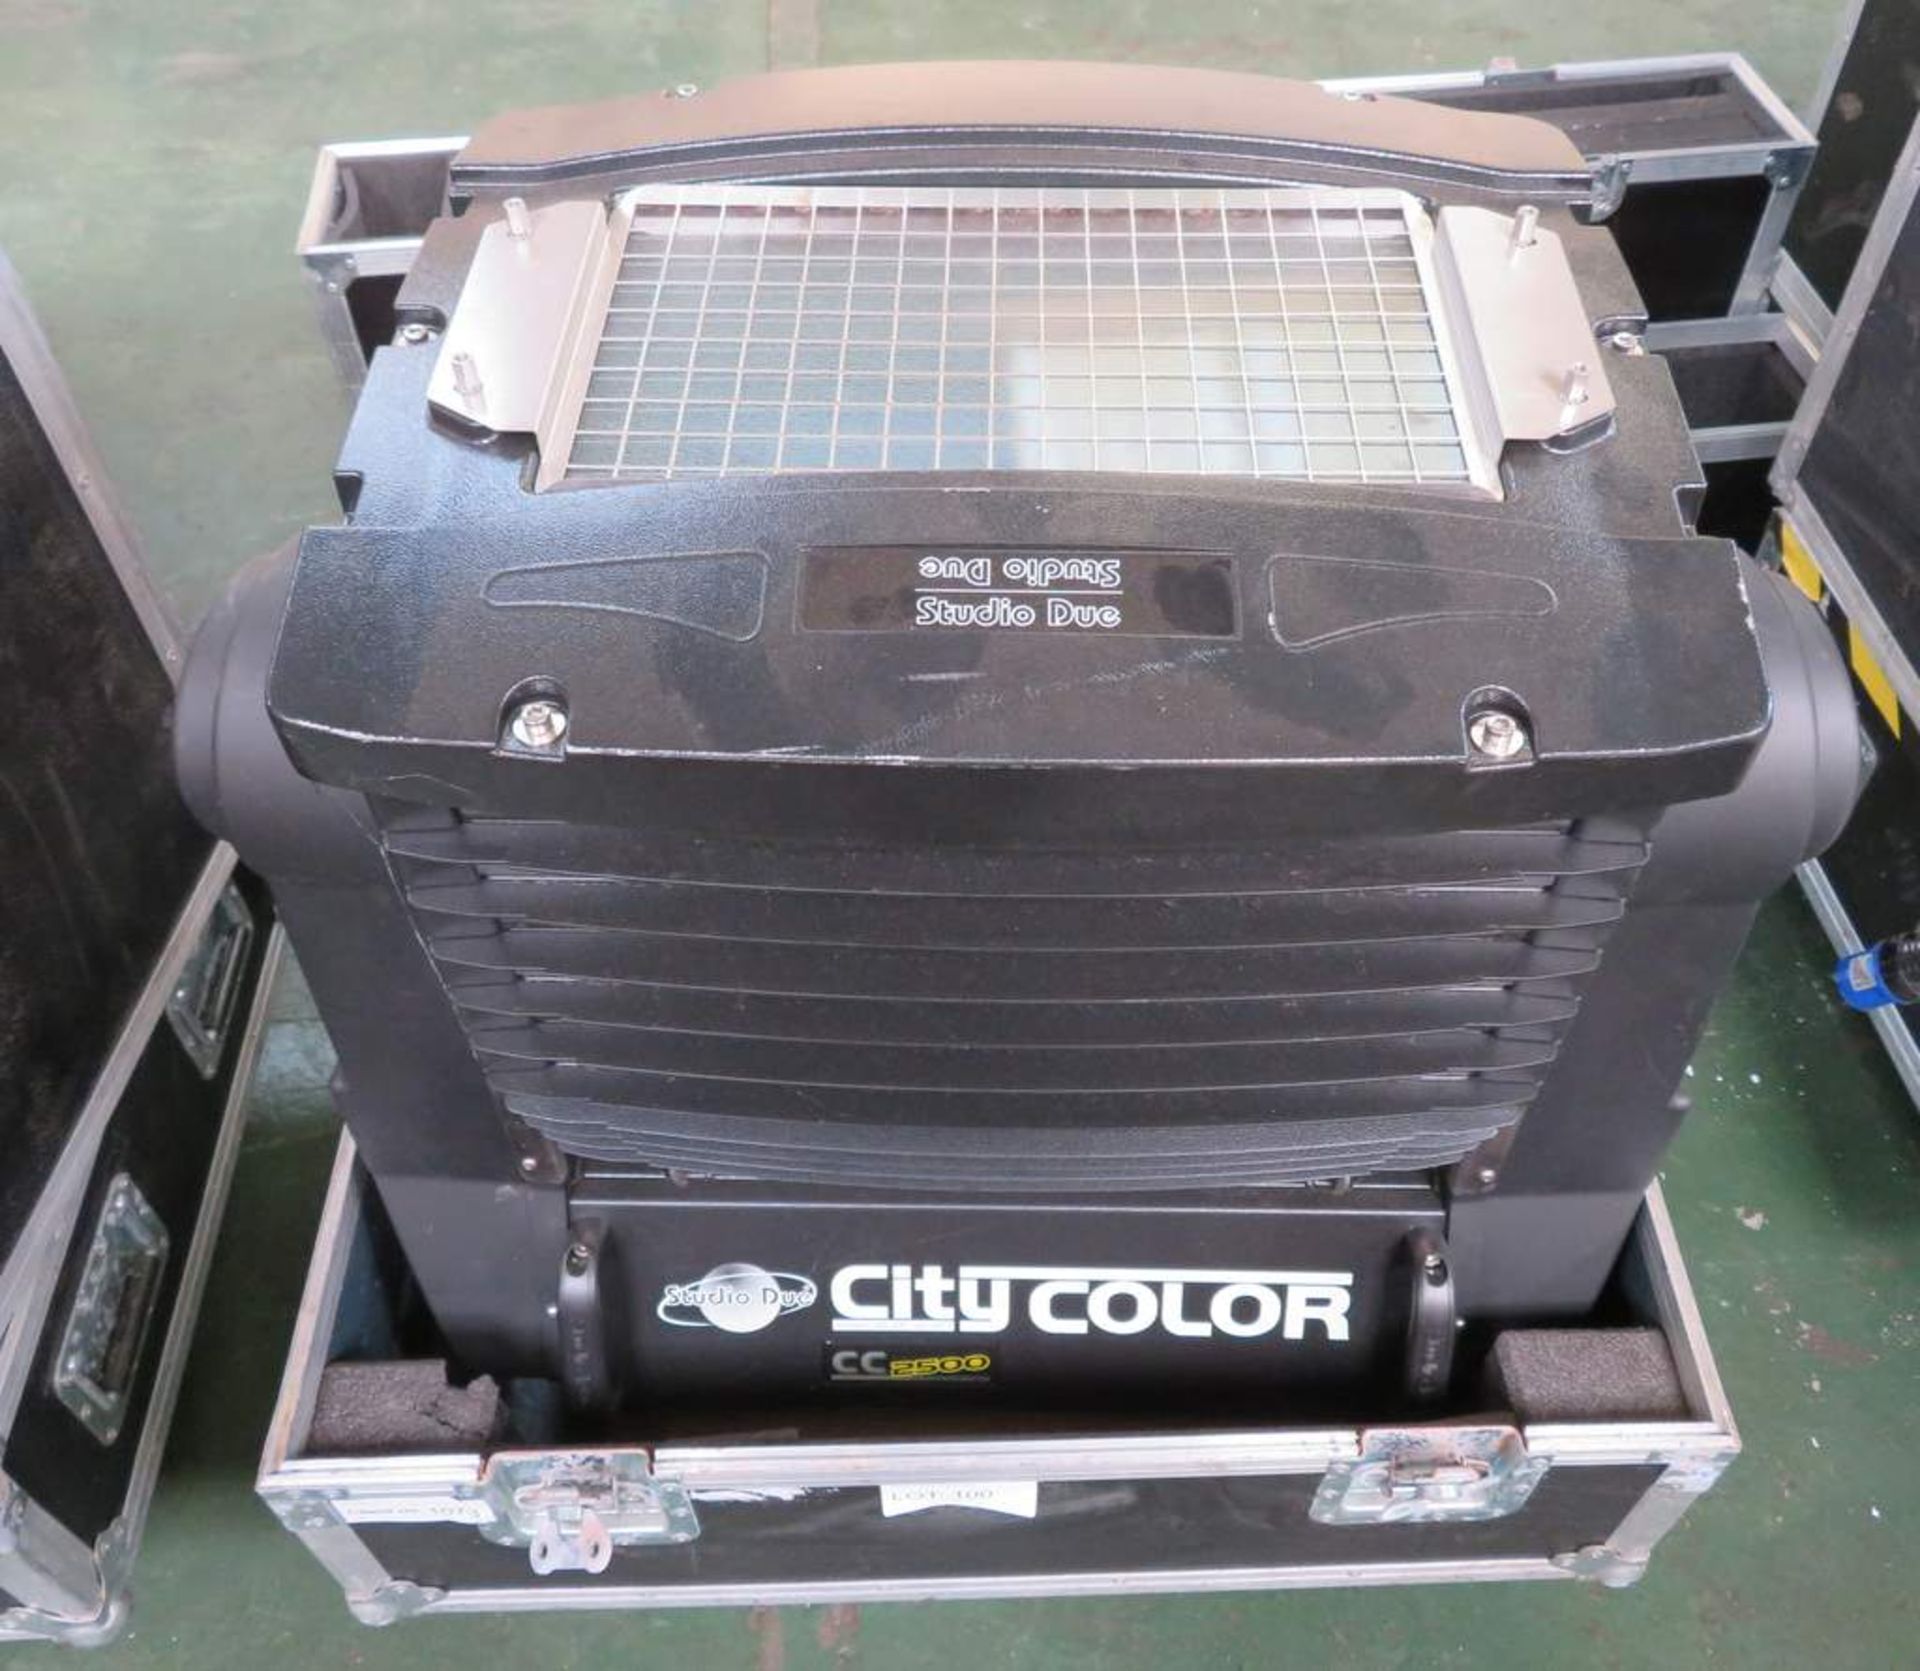 City Colour 2500cc complete with flightcase - Image 2 of 6